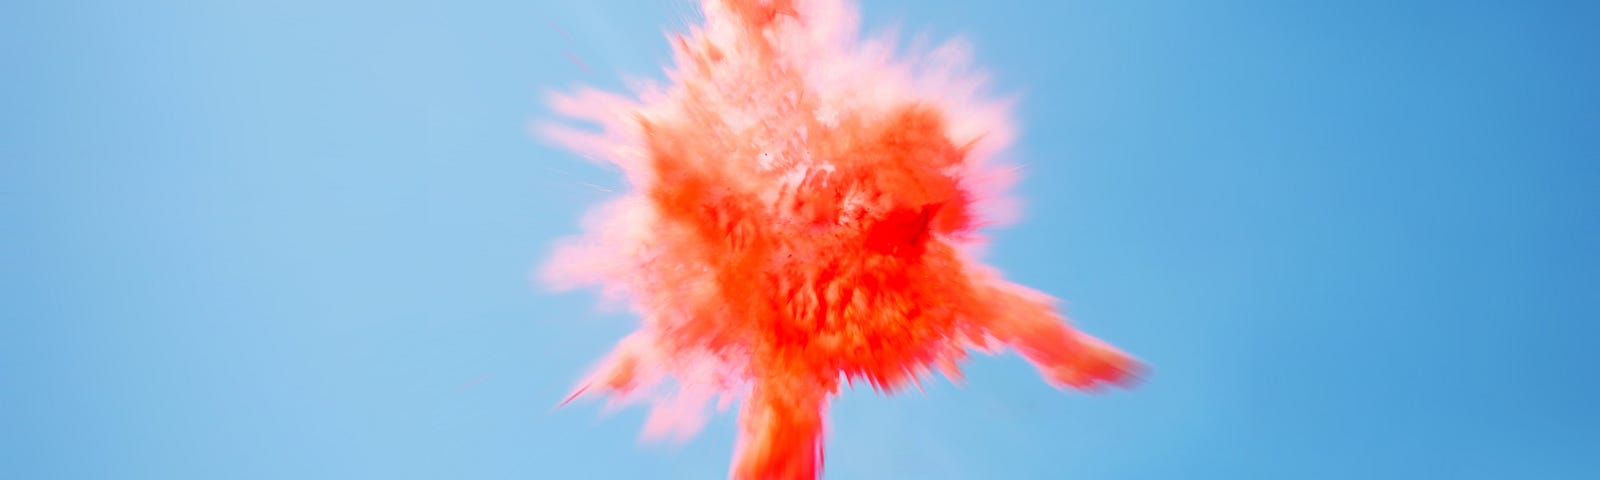 A red powder explosion against a blue background